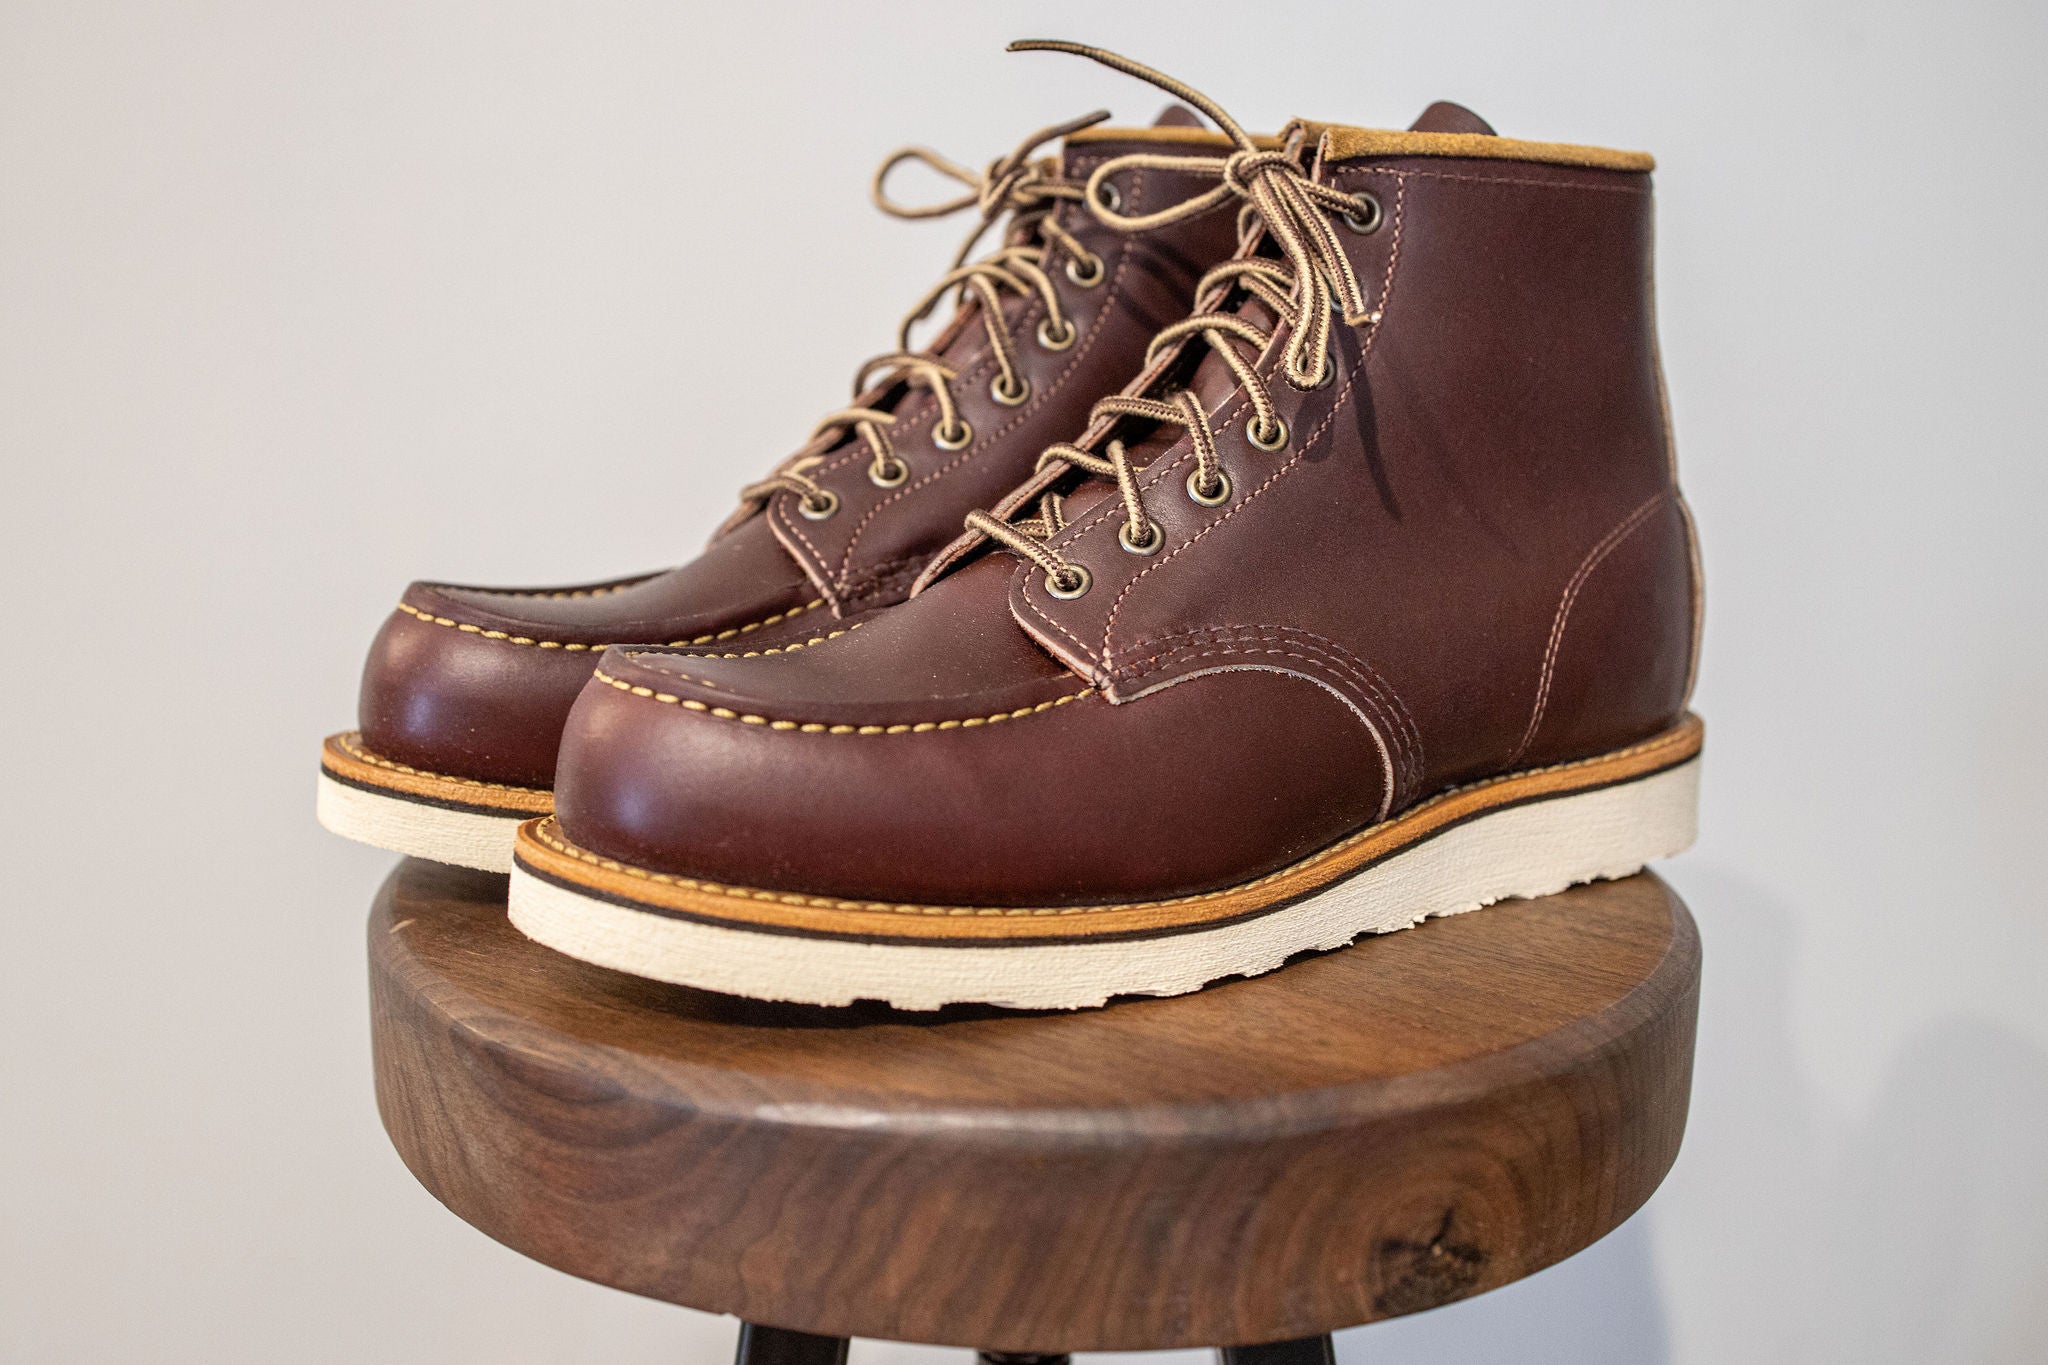 red wing classic